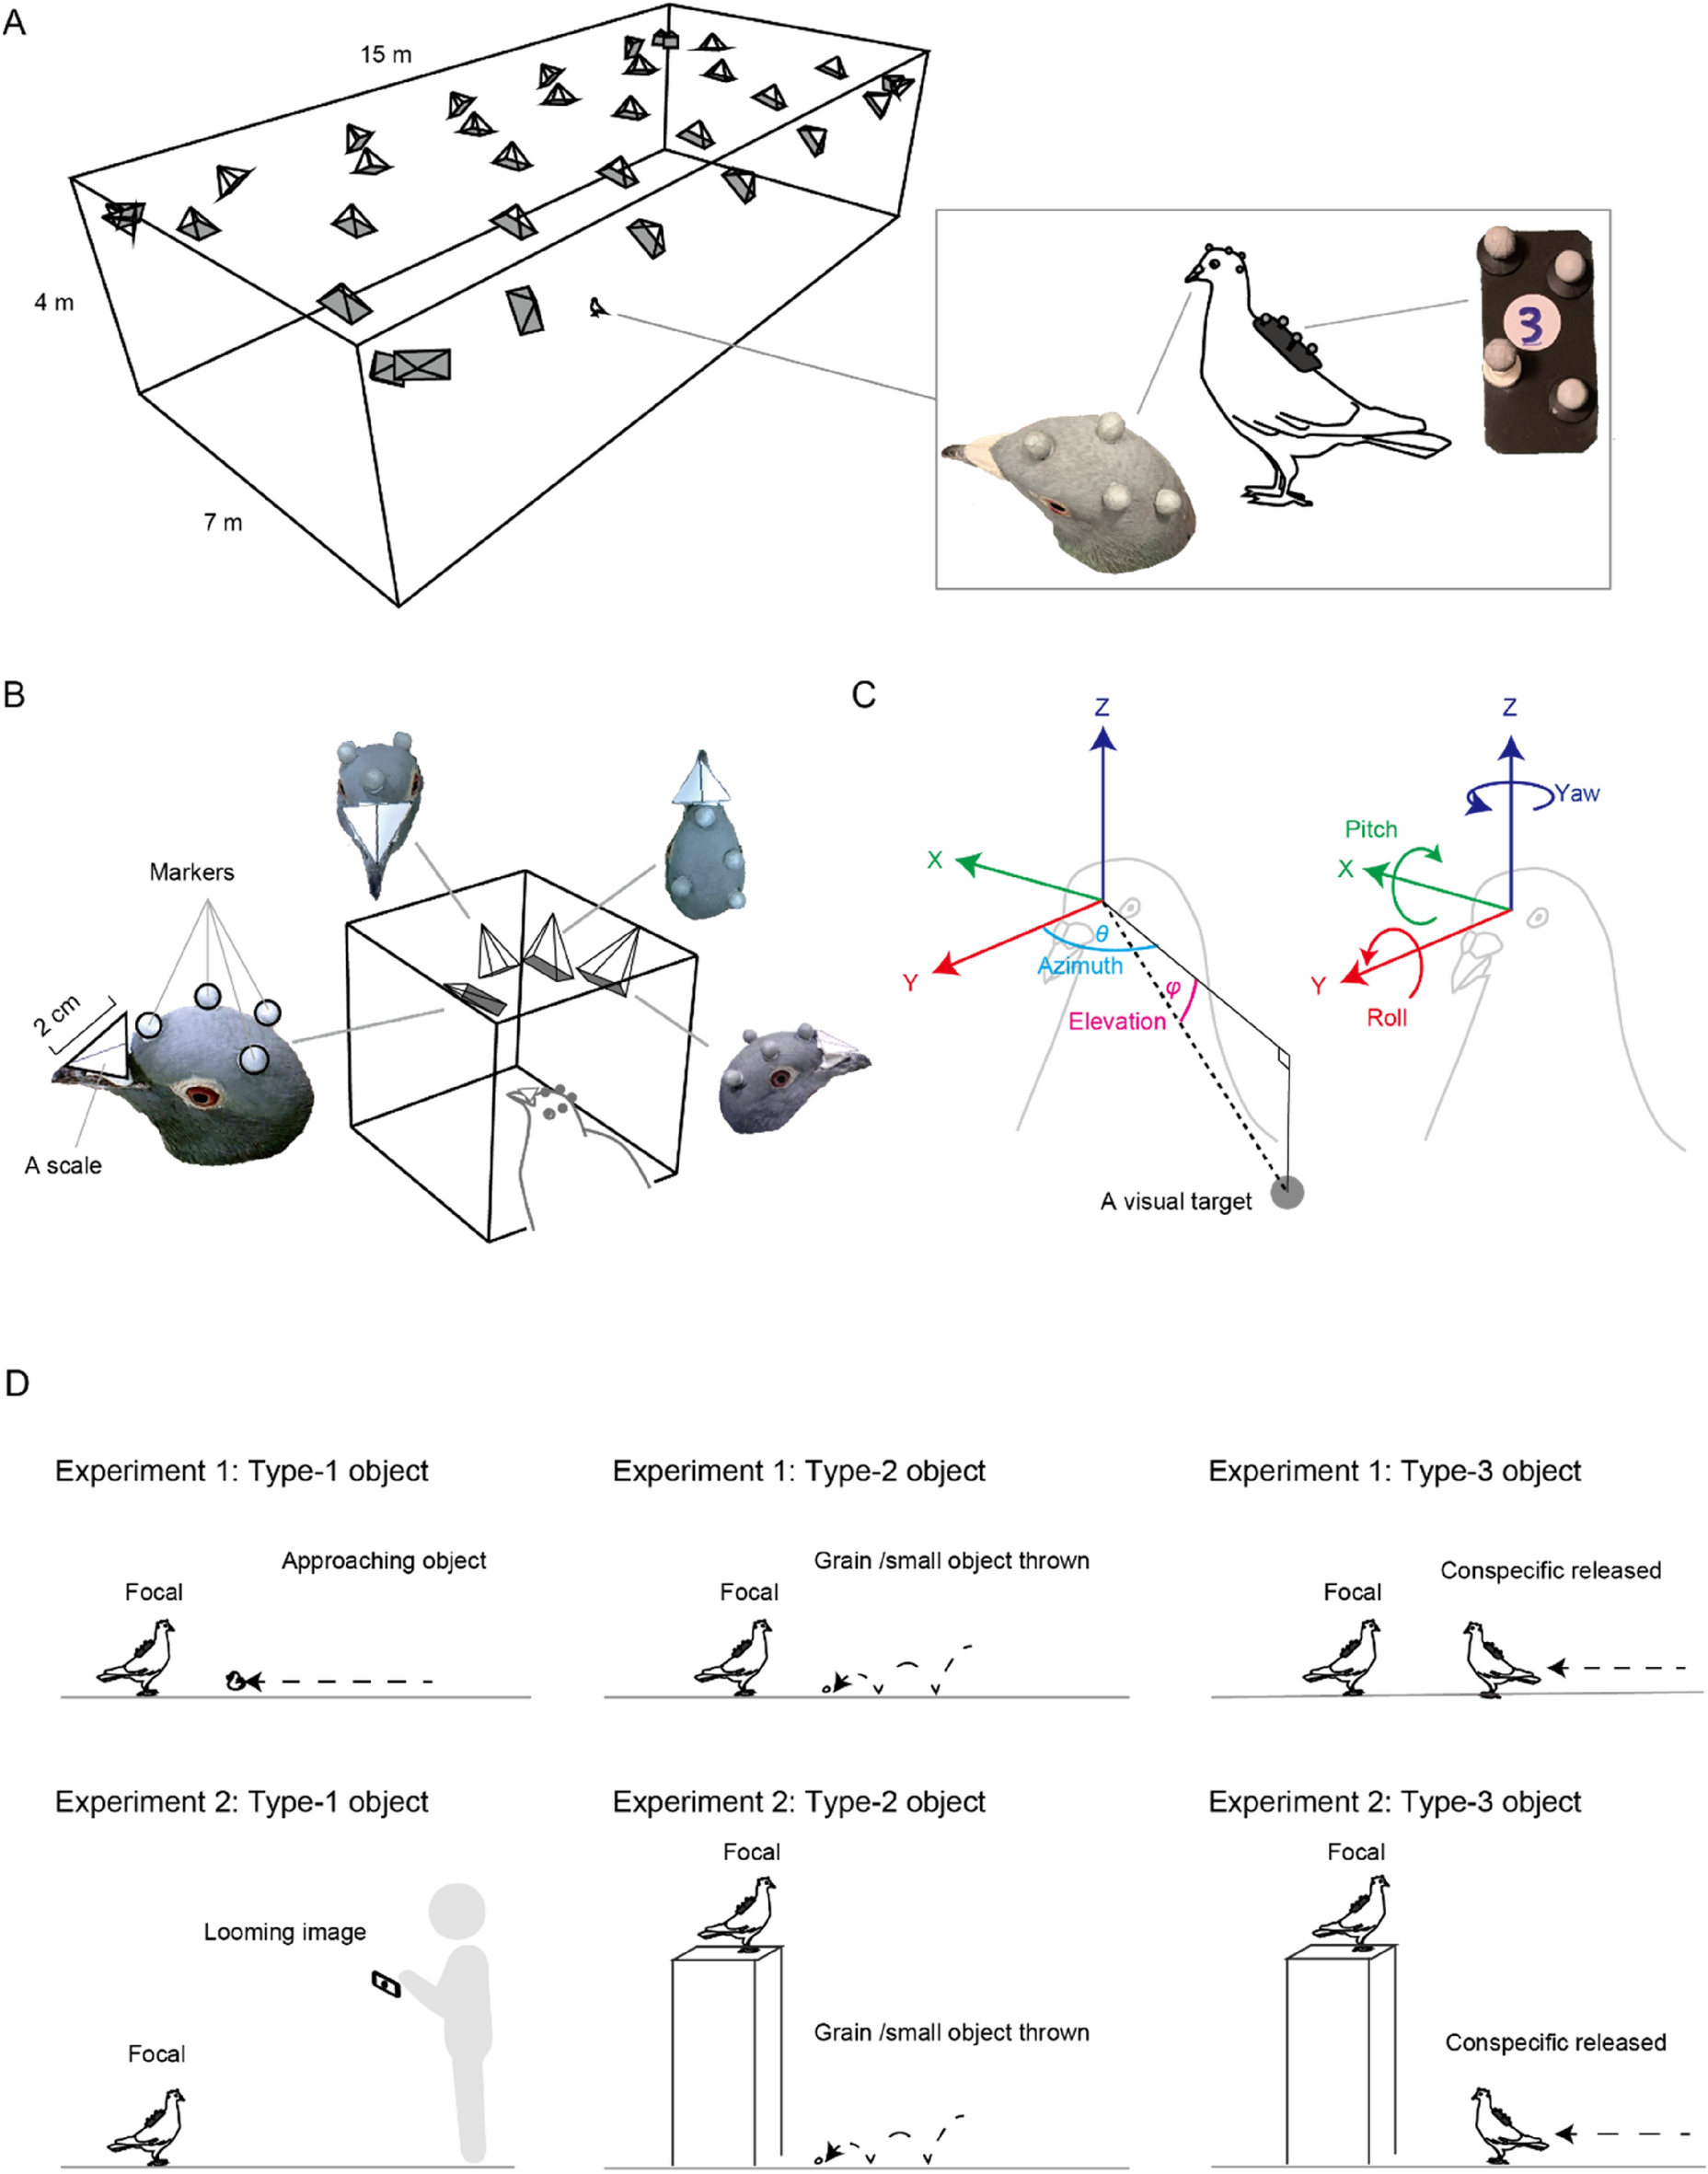 Head-tracking of freely-behaving pigeons in a motion-capture system reveals  the selective use of visual field regions | Scientific Reports